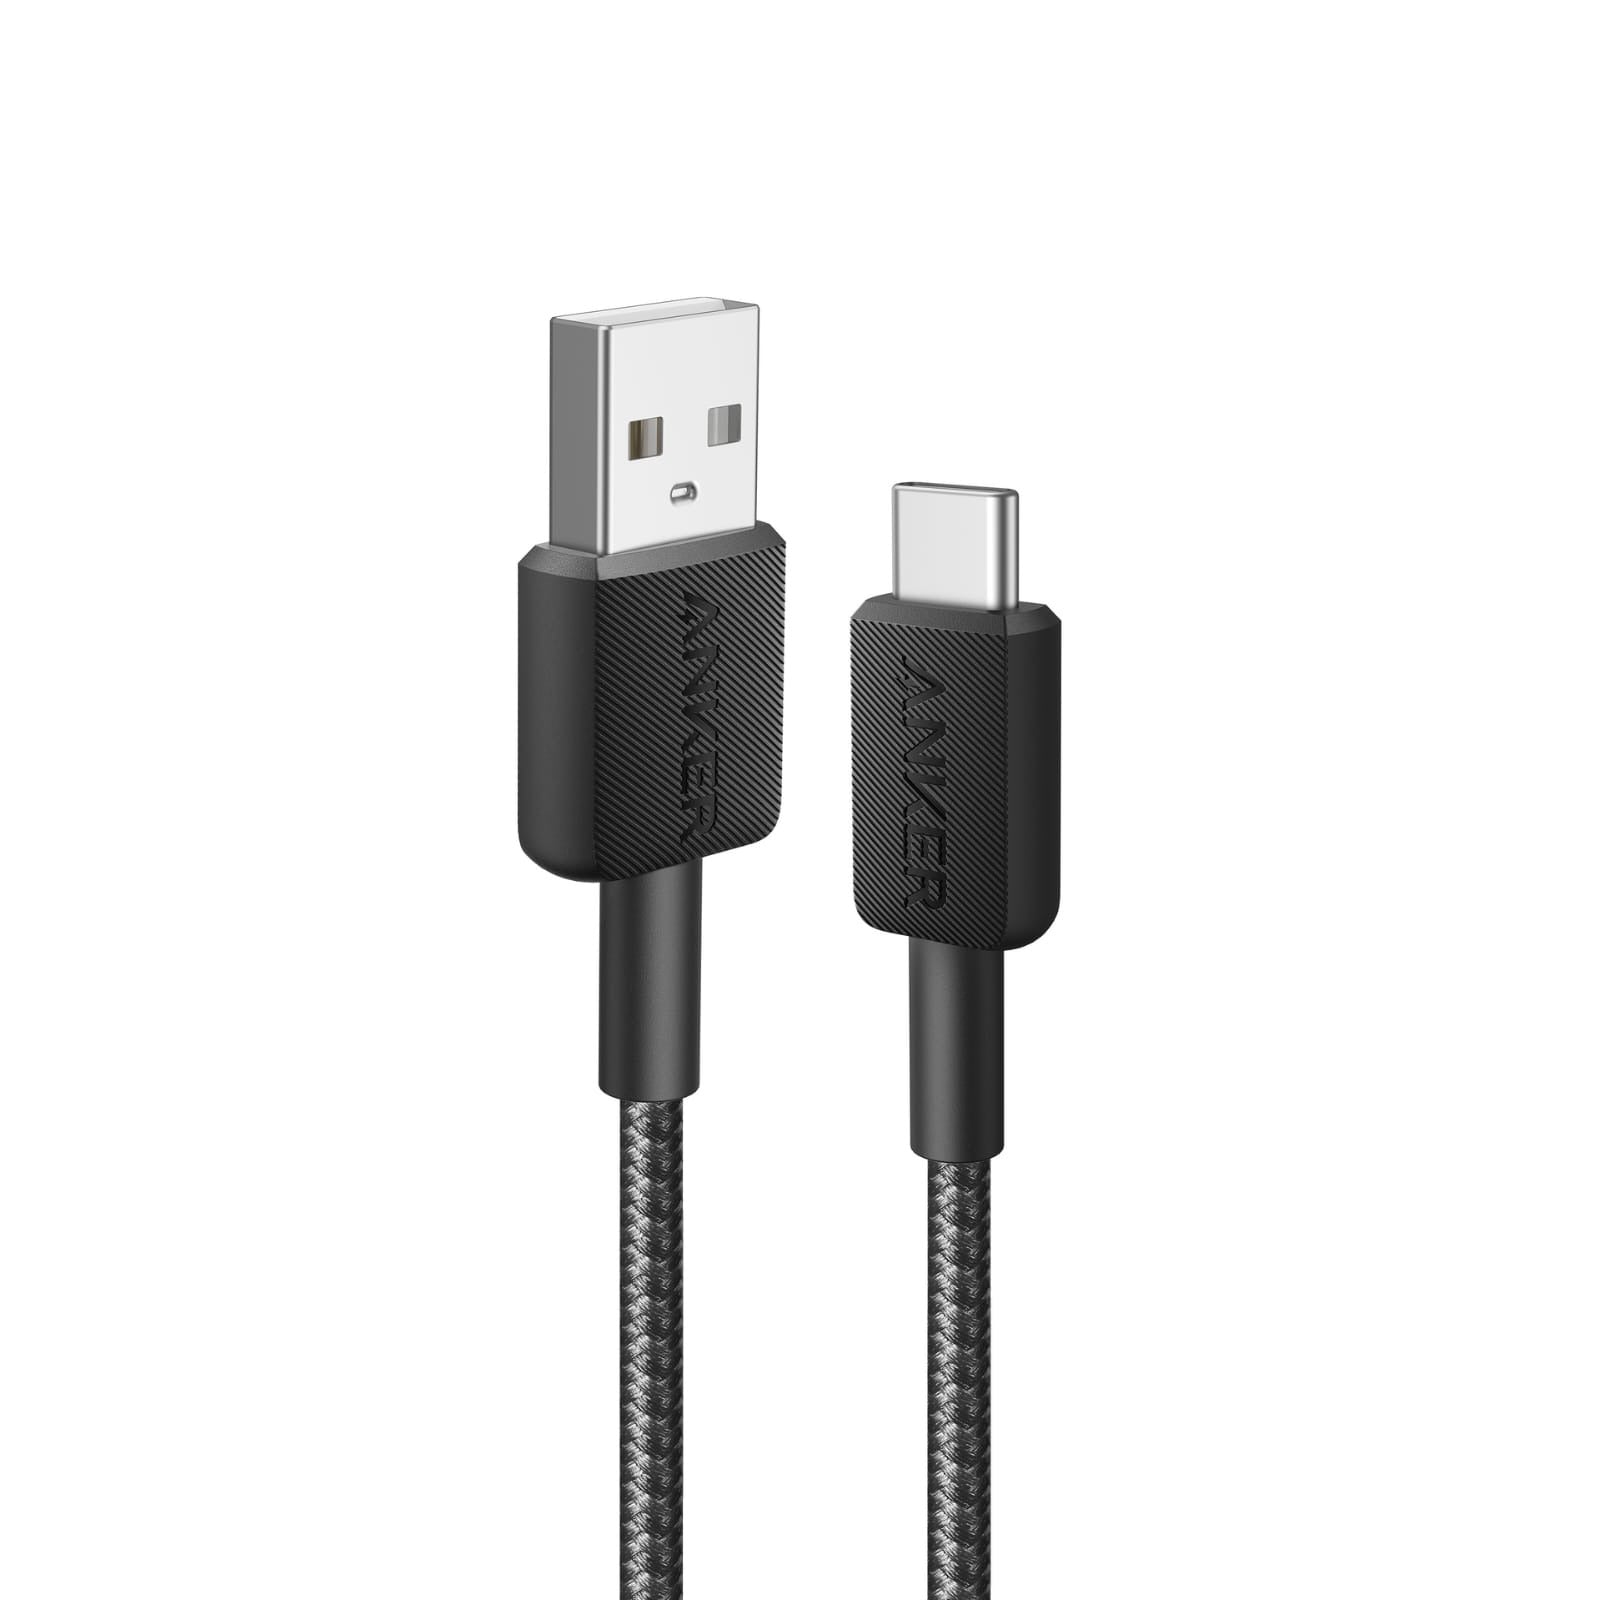 Anker 322 USB-A to USB-C Cable in black color